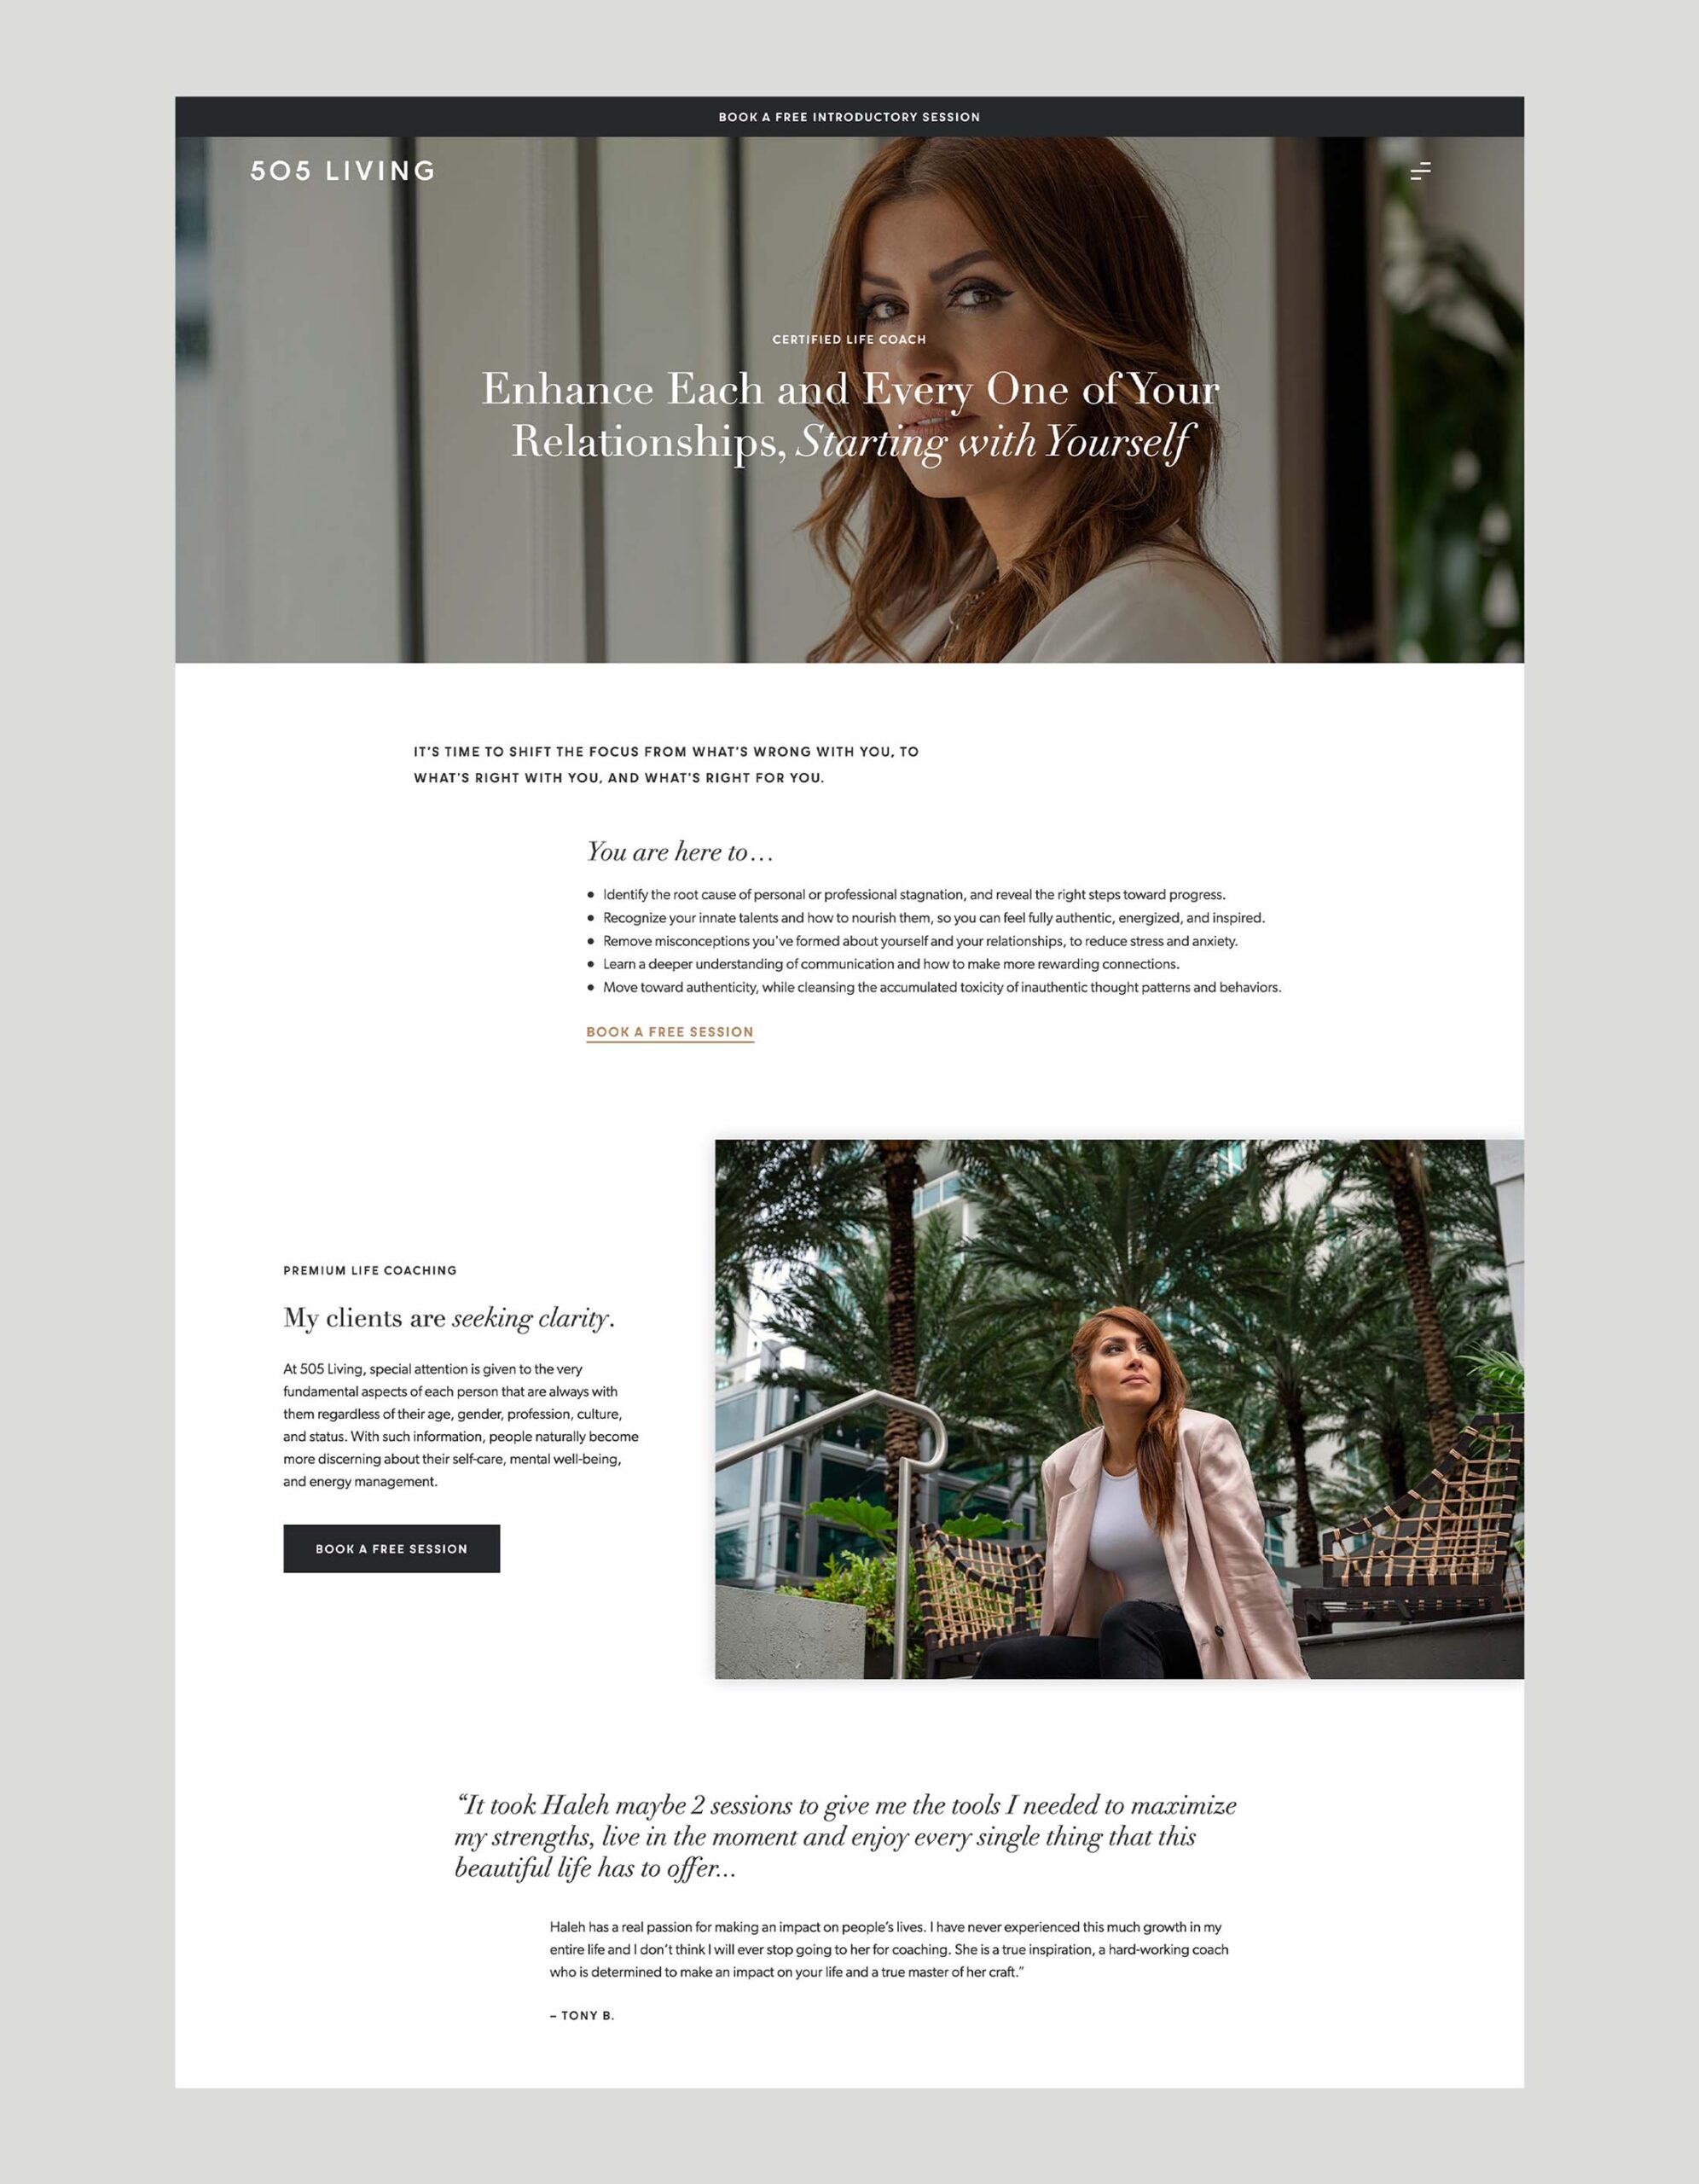 Website design mockup - 505 Living - Whiskey and Red Small Business Branding and Website Design Packages